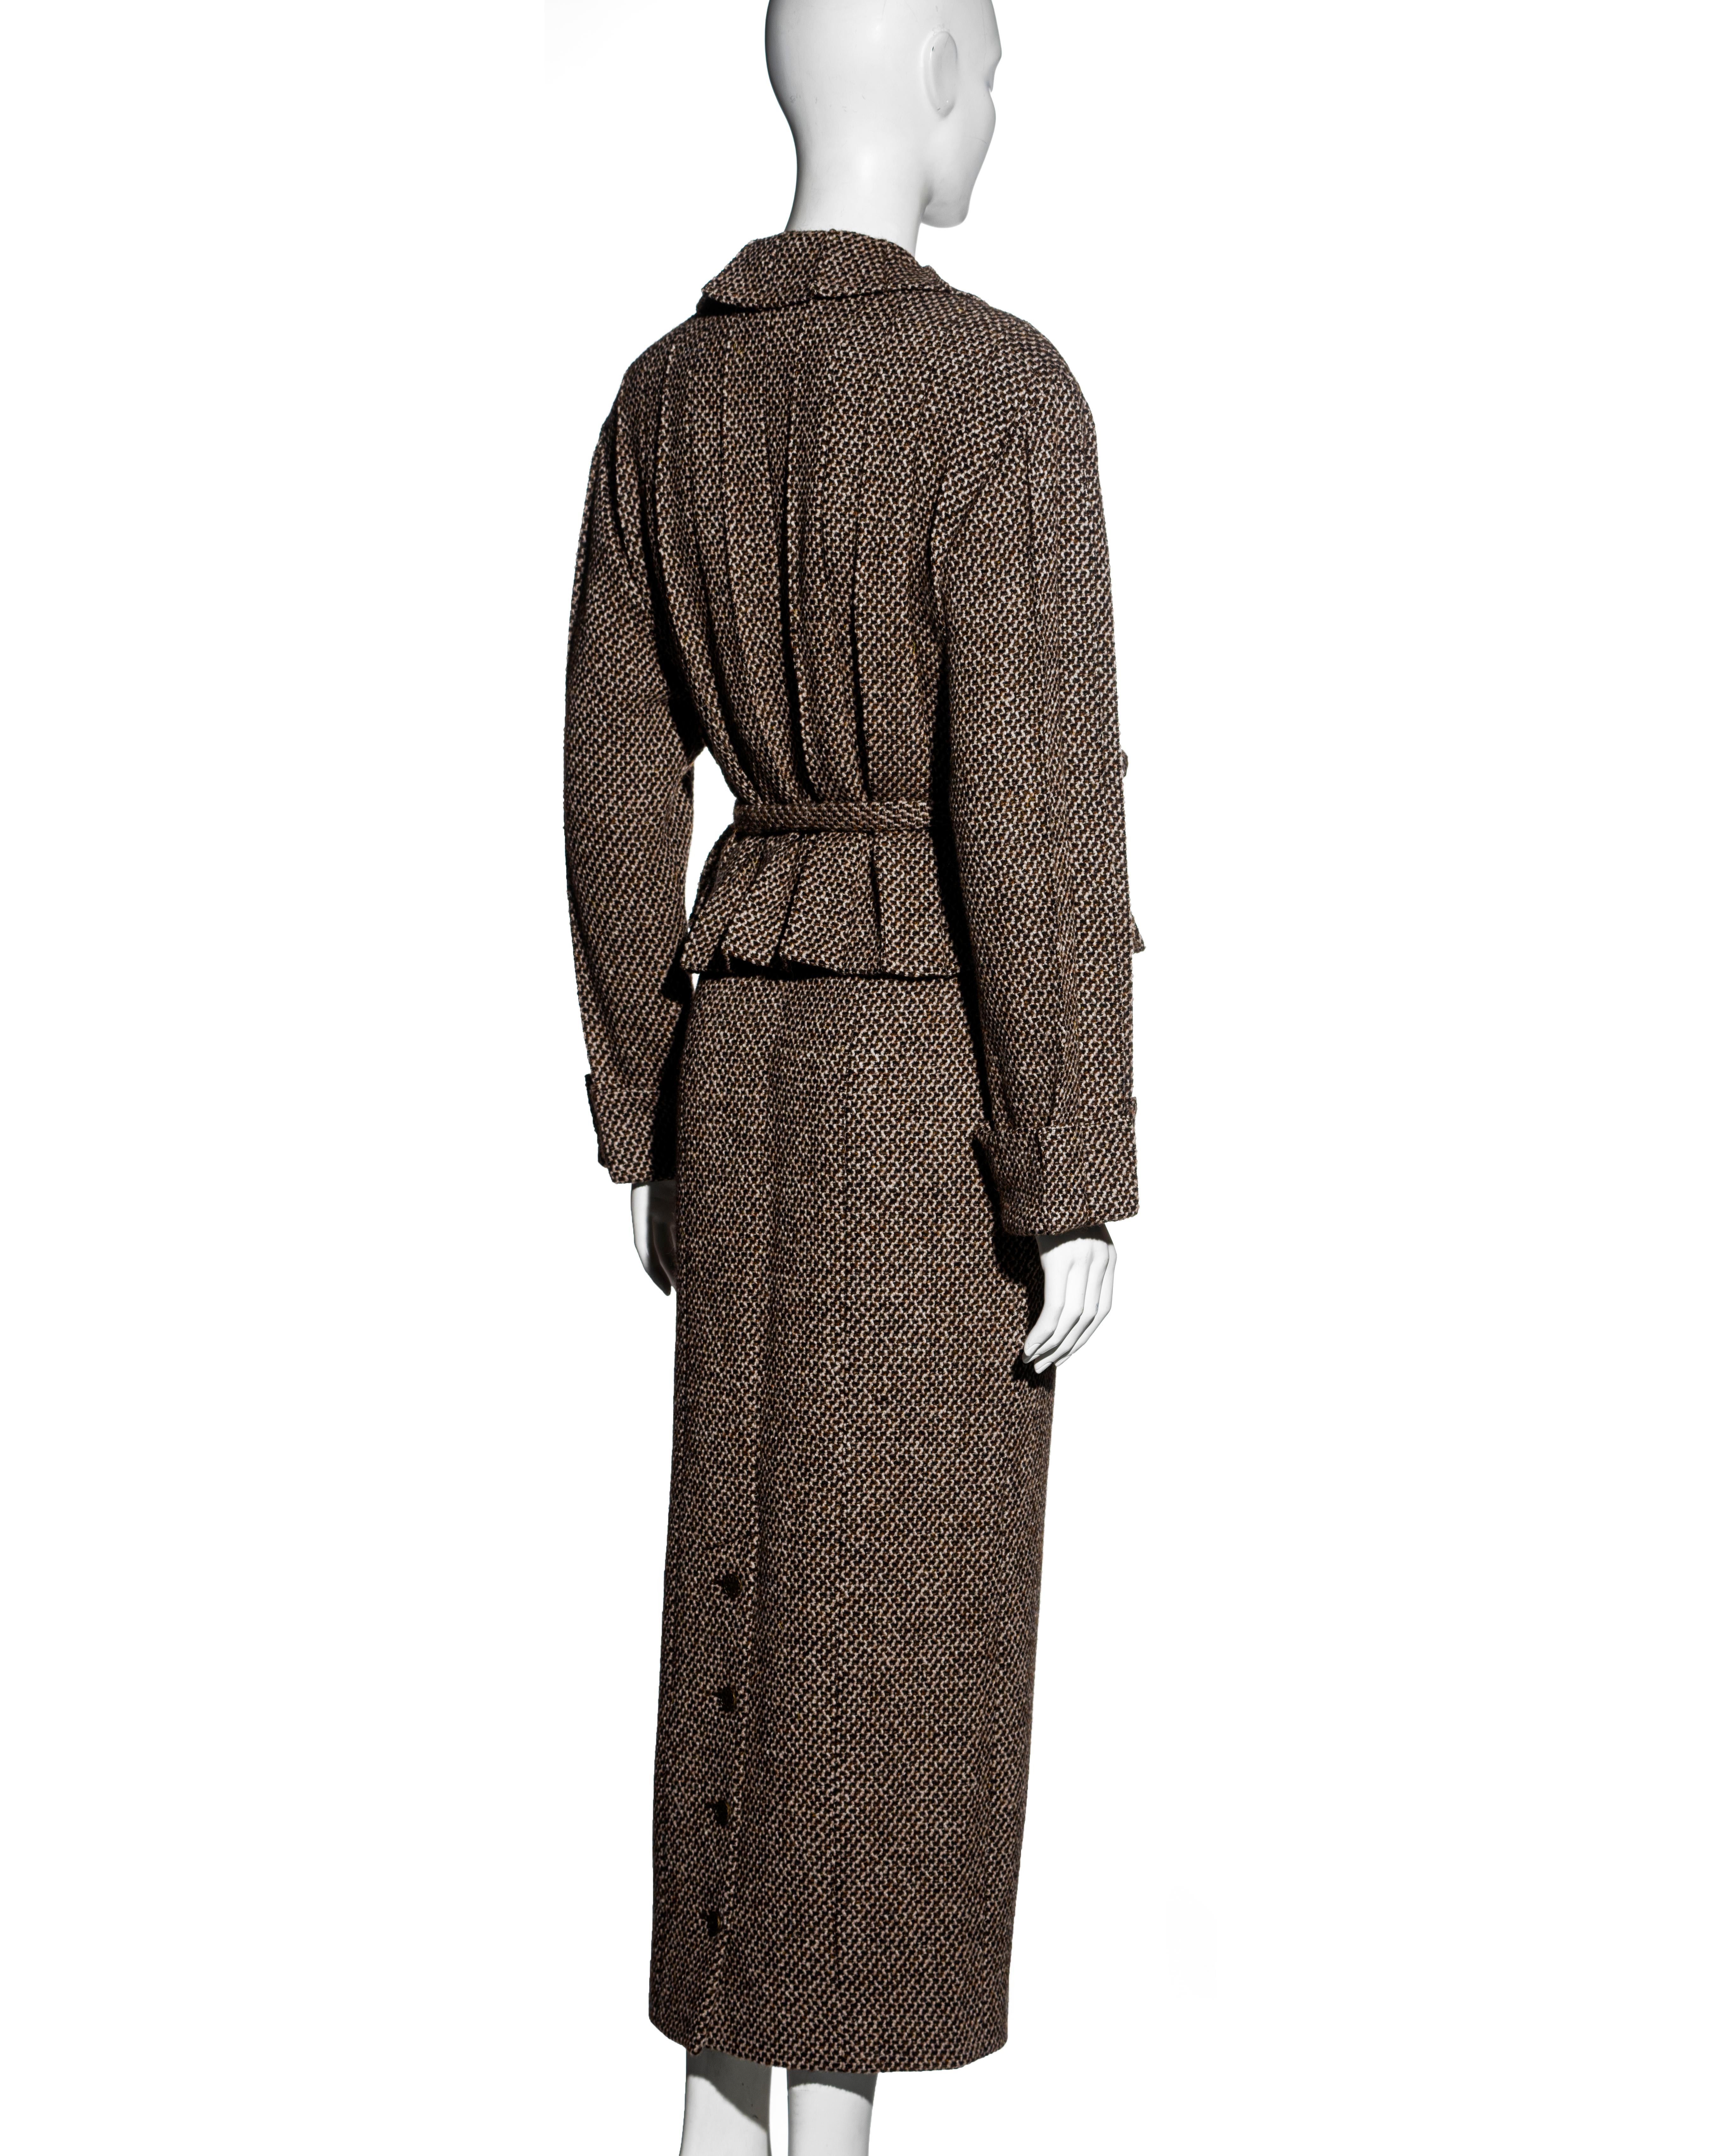 Women's Chanel by Karl Lagerfeld brown tweed pleated jacket maxi skirt suit, fw 1998 For Sale